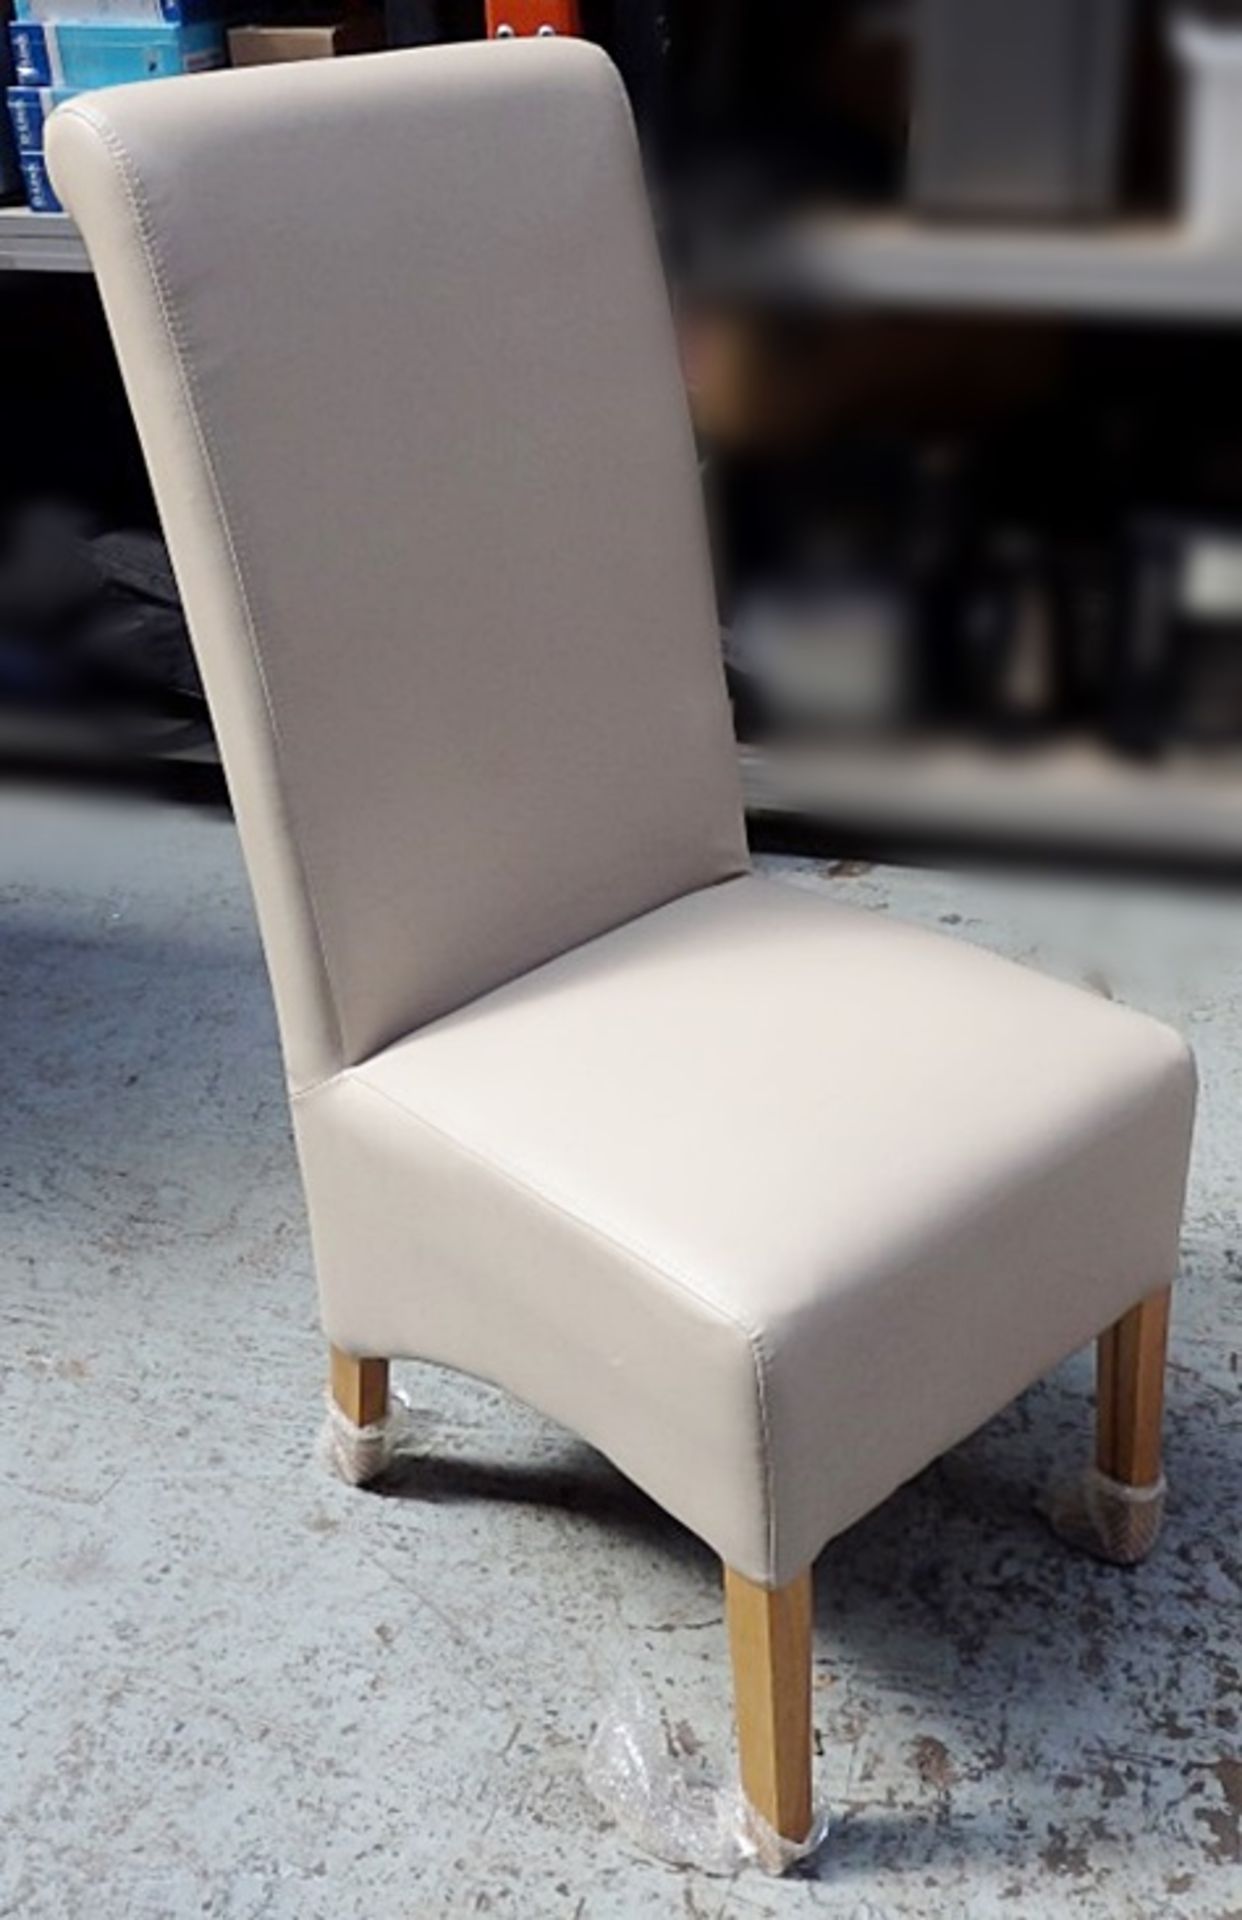 2 x Faux Leather Dining Chairs - Colour: Cream (Ivory) - Seating Dimensions: W44 x D60 x Height